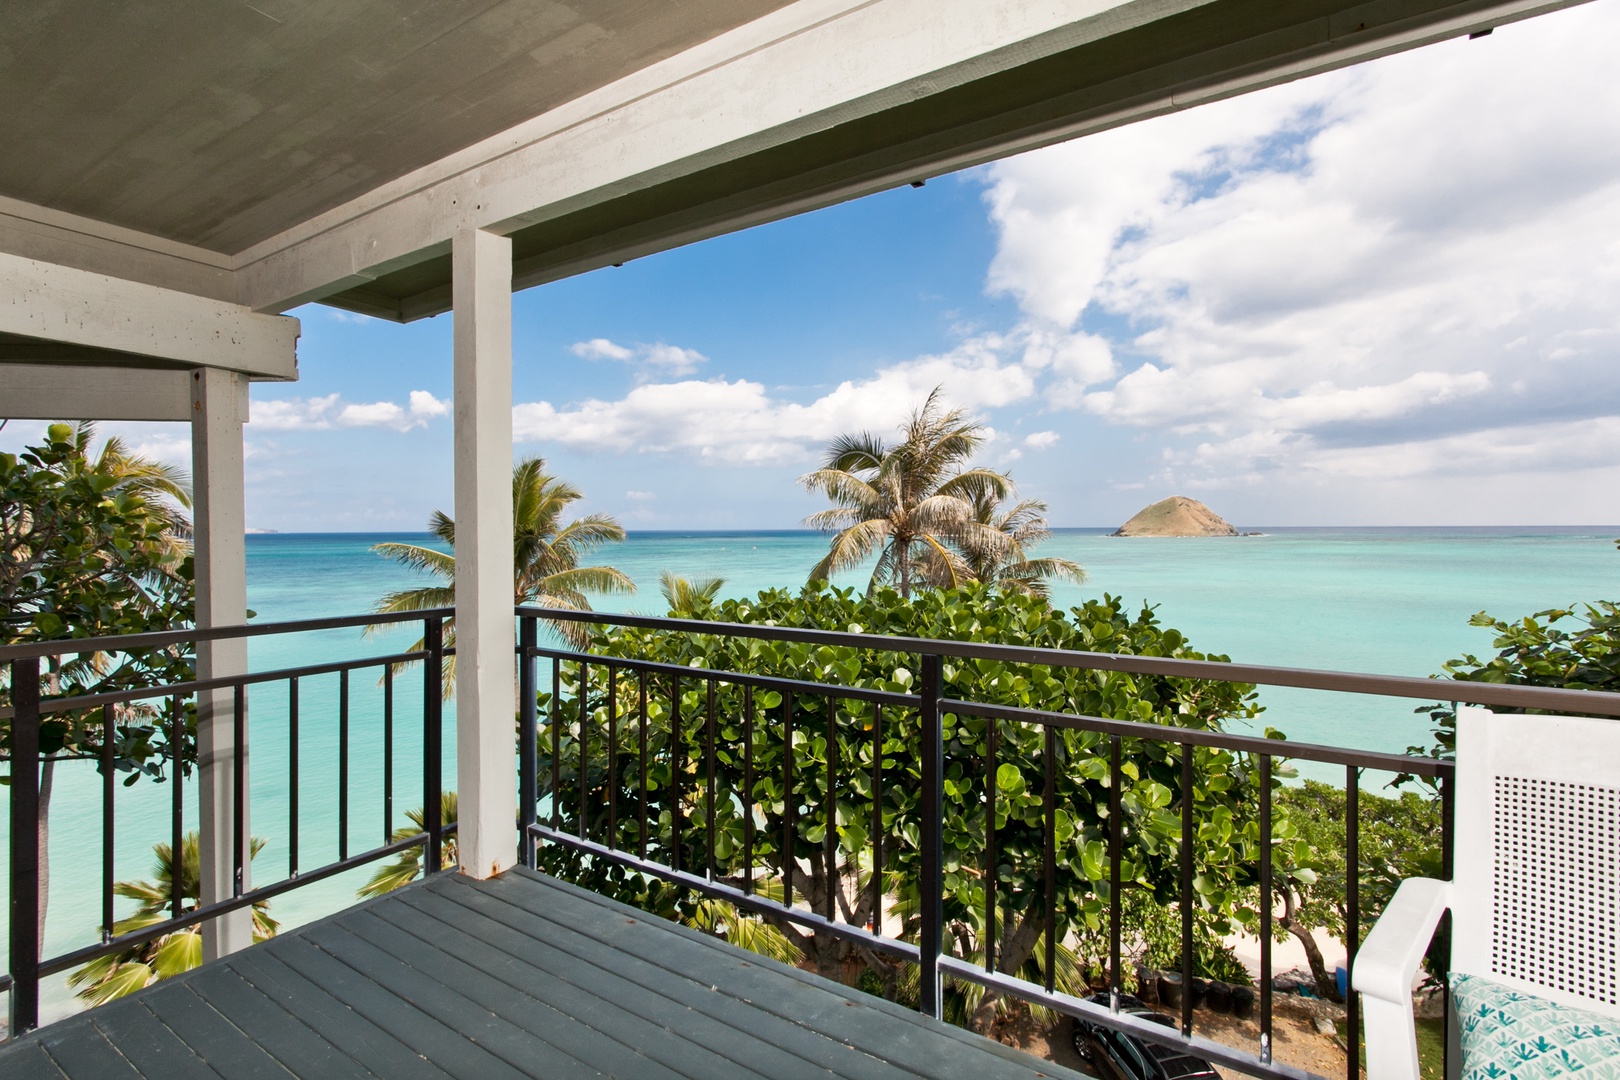 Kailua Vacation Rentals, Hale Kolea* - Ocean views from the lanai are the best spot for relaxing the day away.